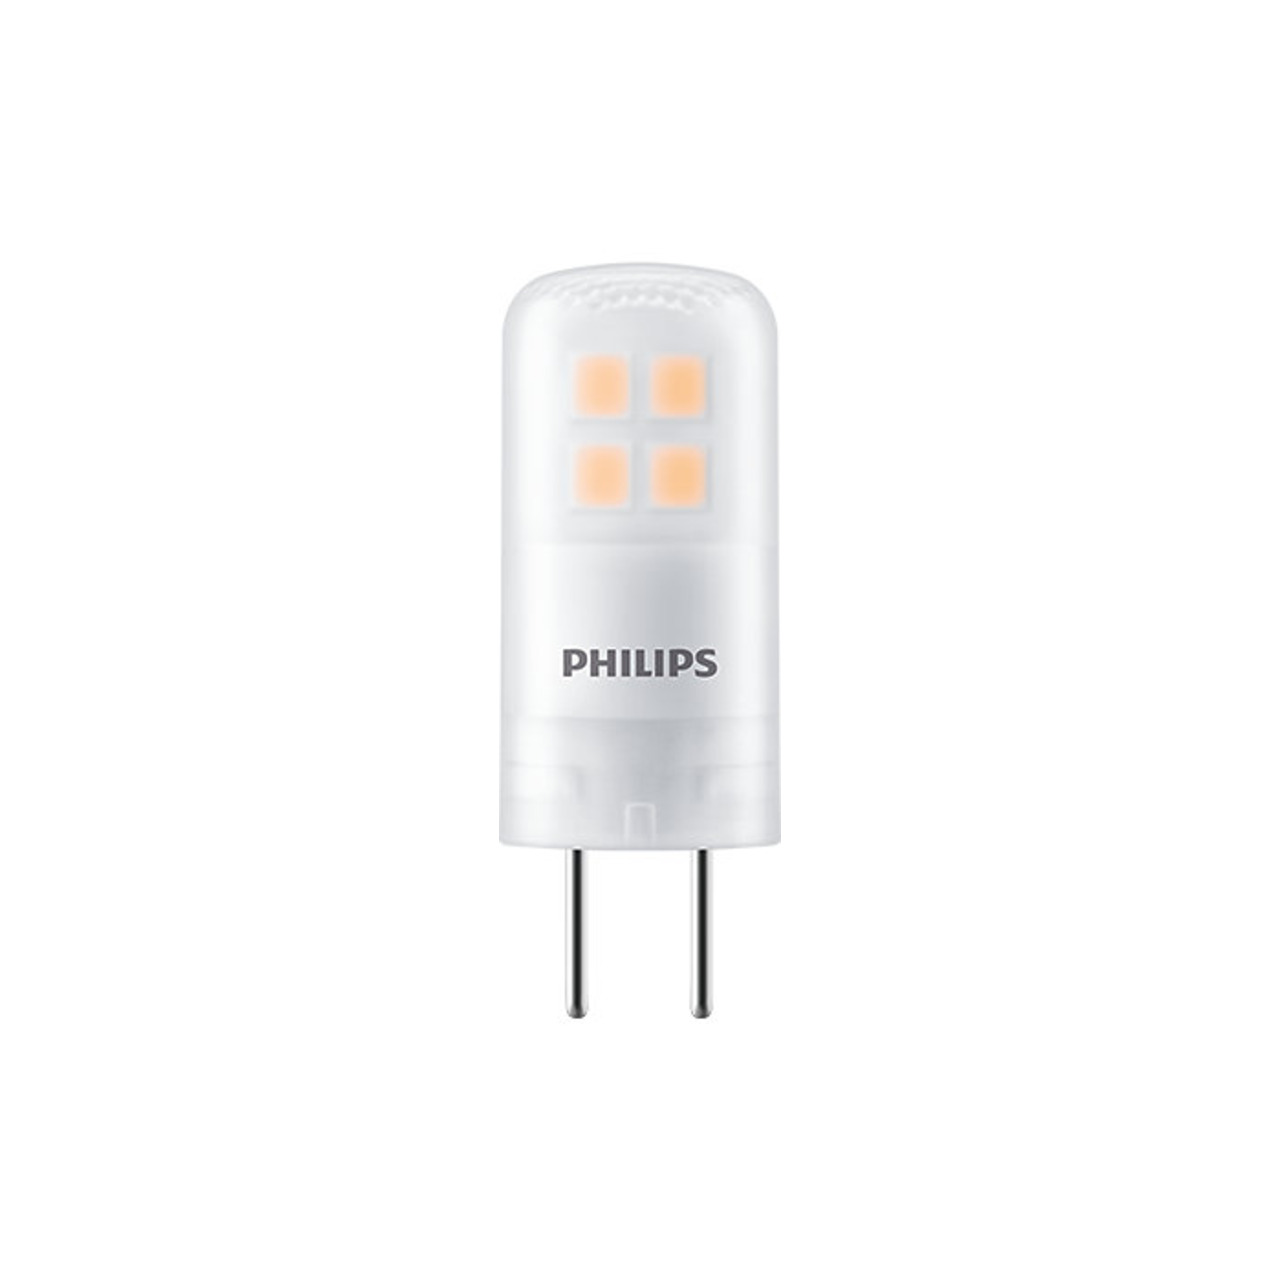 Philips 1-8-W-G4-LED-Lampe CorePro LEDcapsule- 205 lm- nicht dimmbar- warmweiss unter Beleuchtung